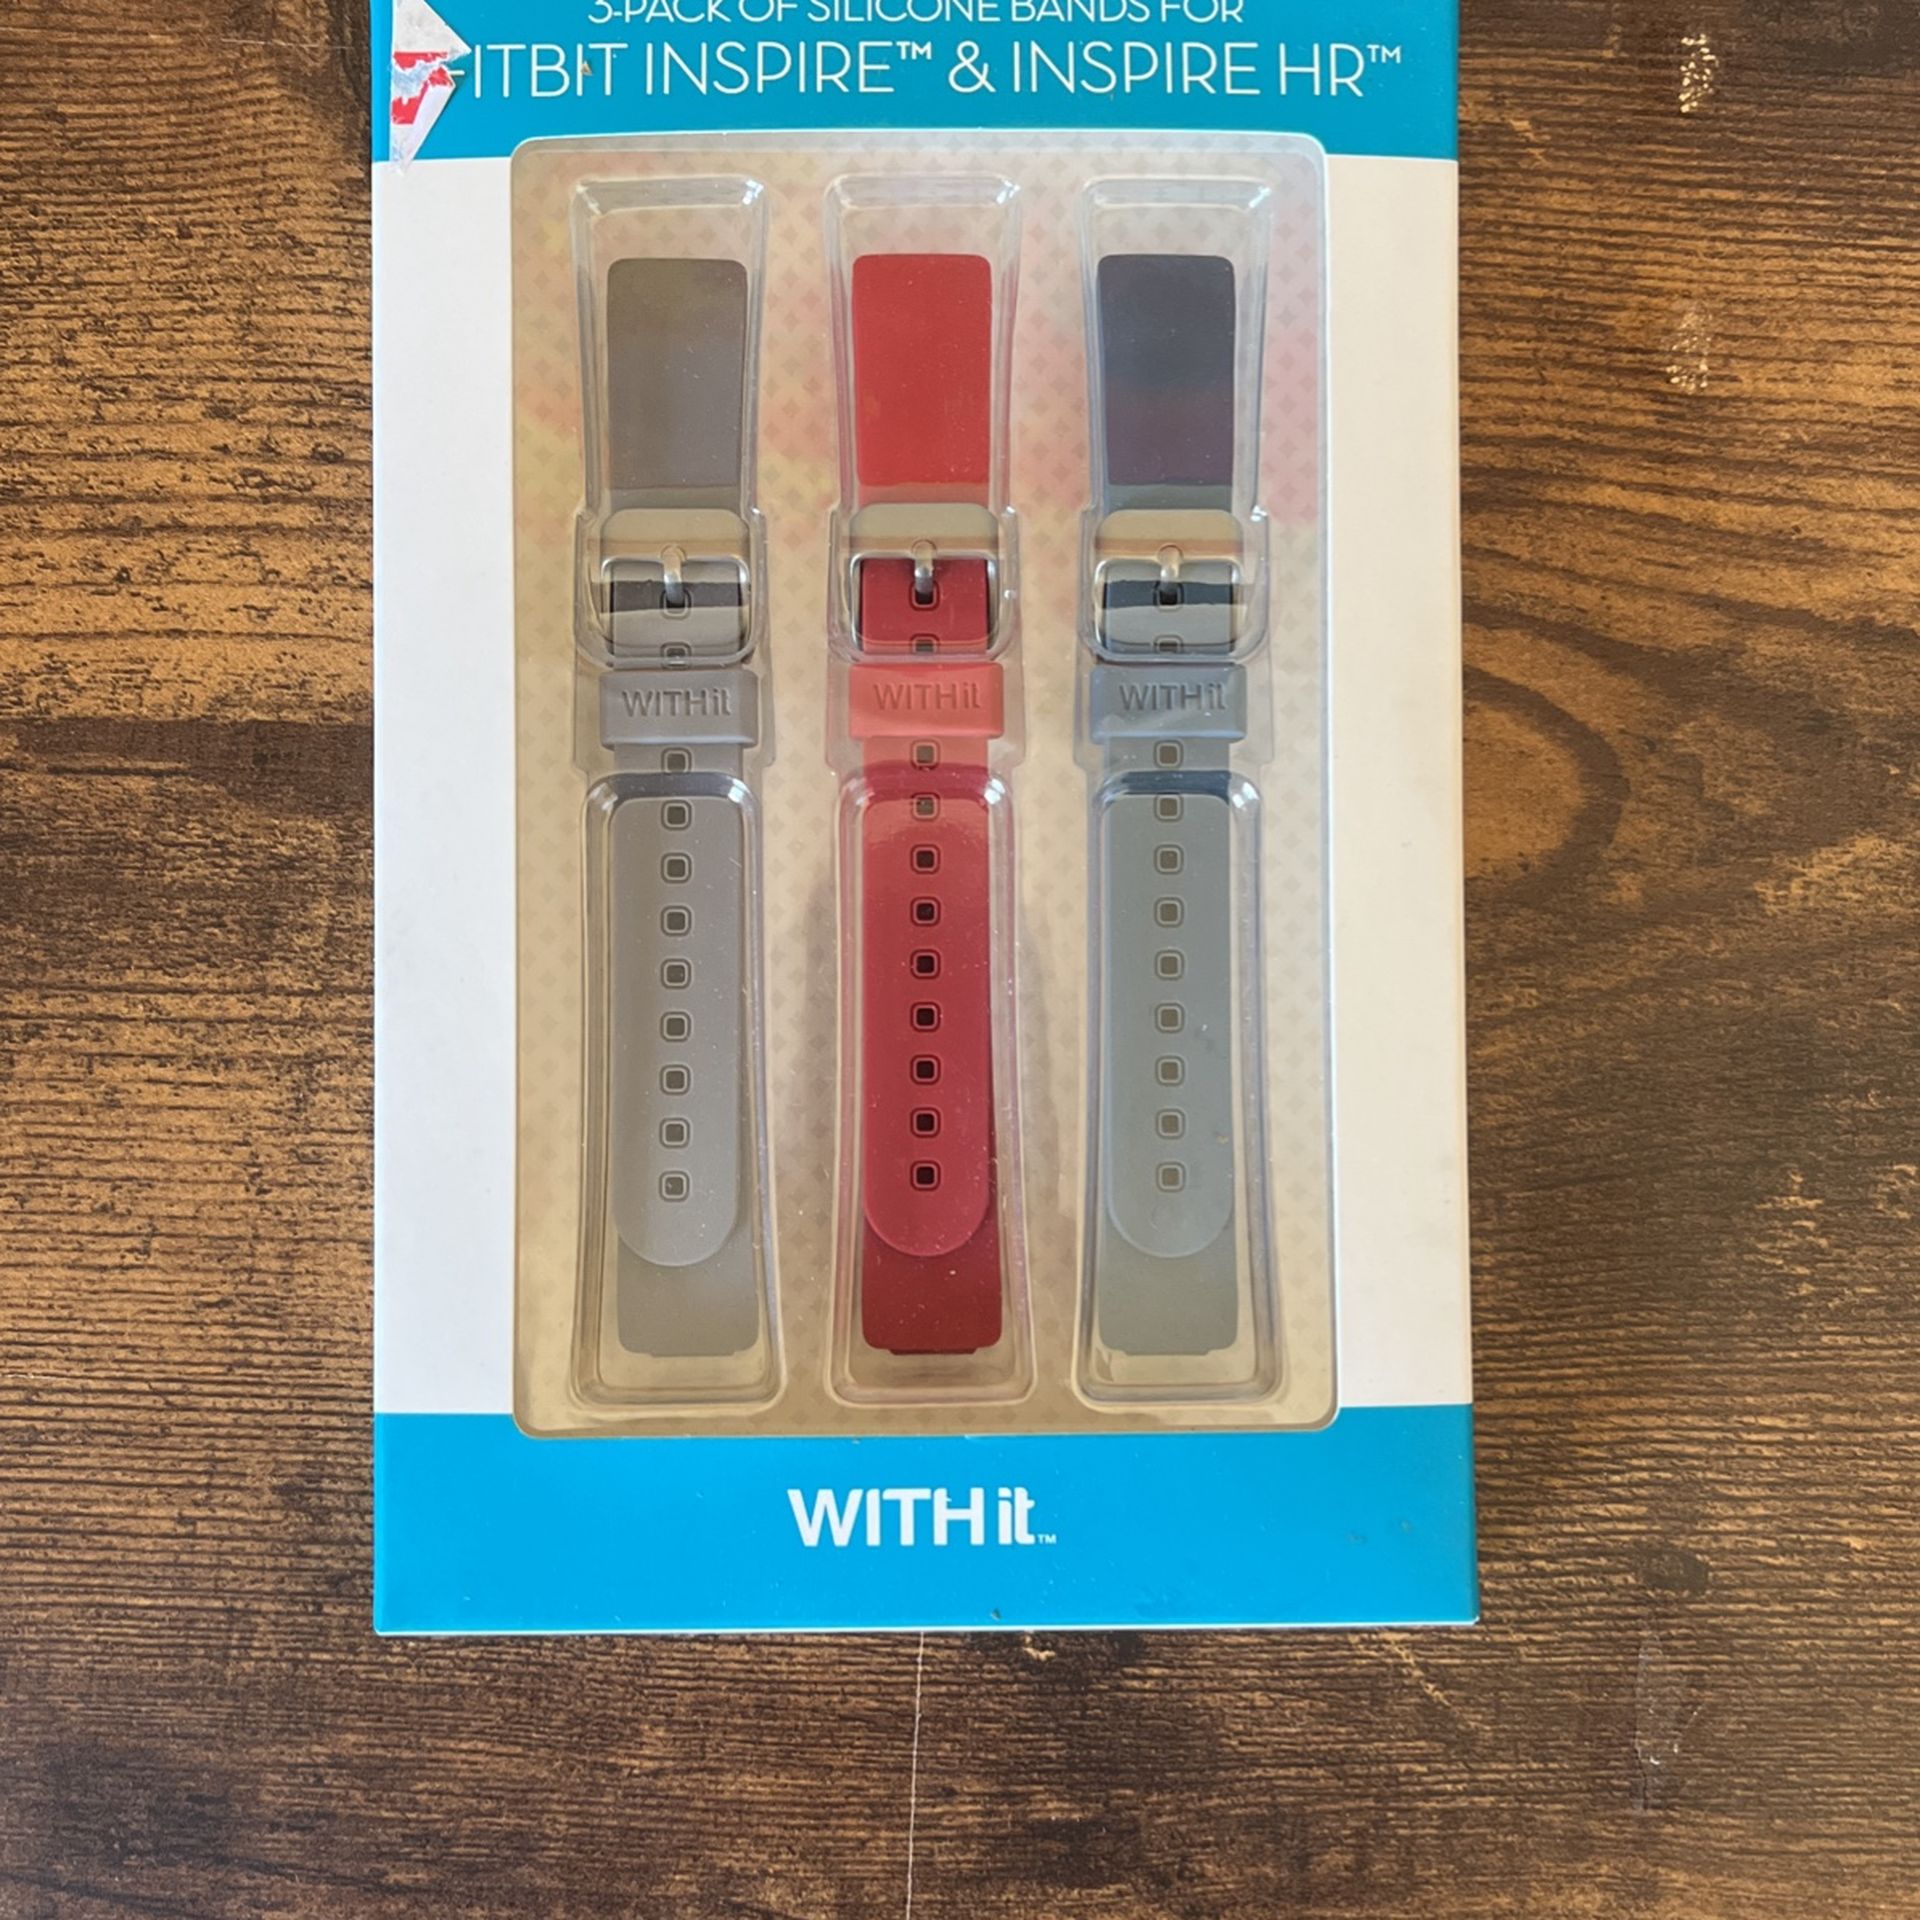 New, 3-pk Silicone Bands for Fitbit Inspire/HR